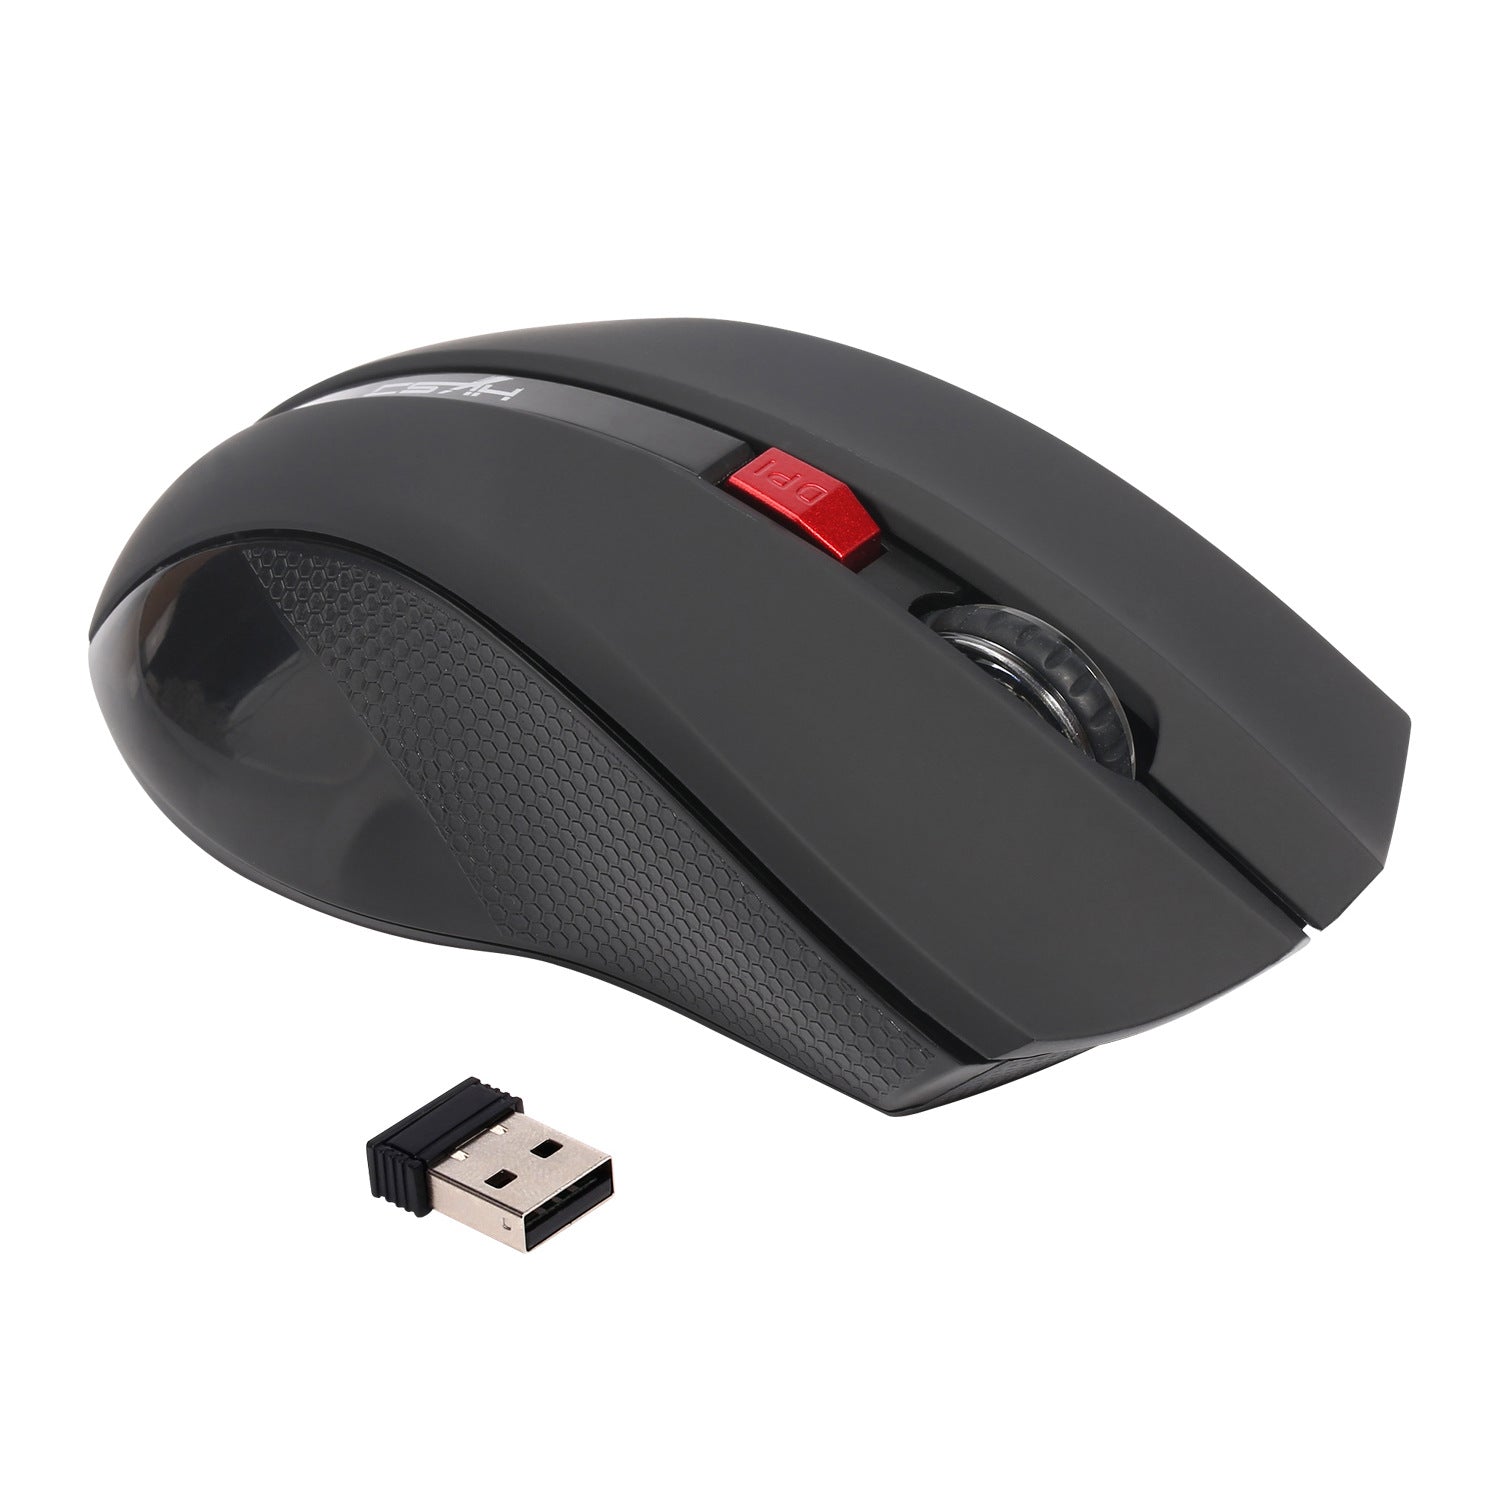 Laptop business office 2.4G wireless mouse